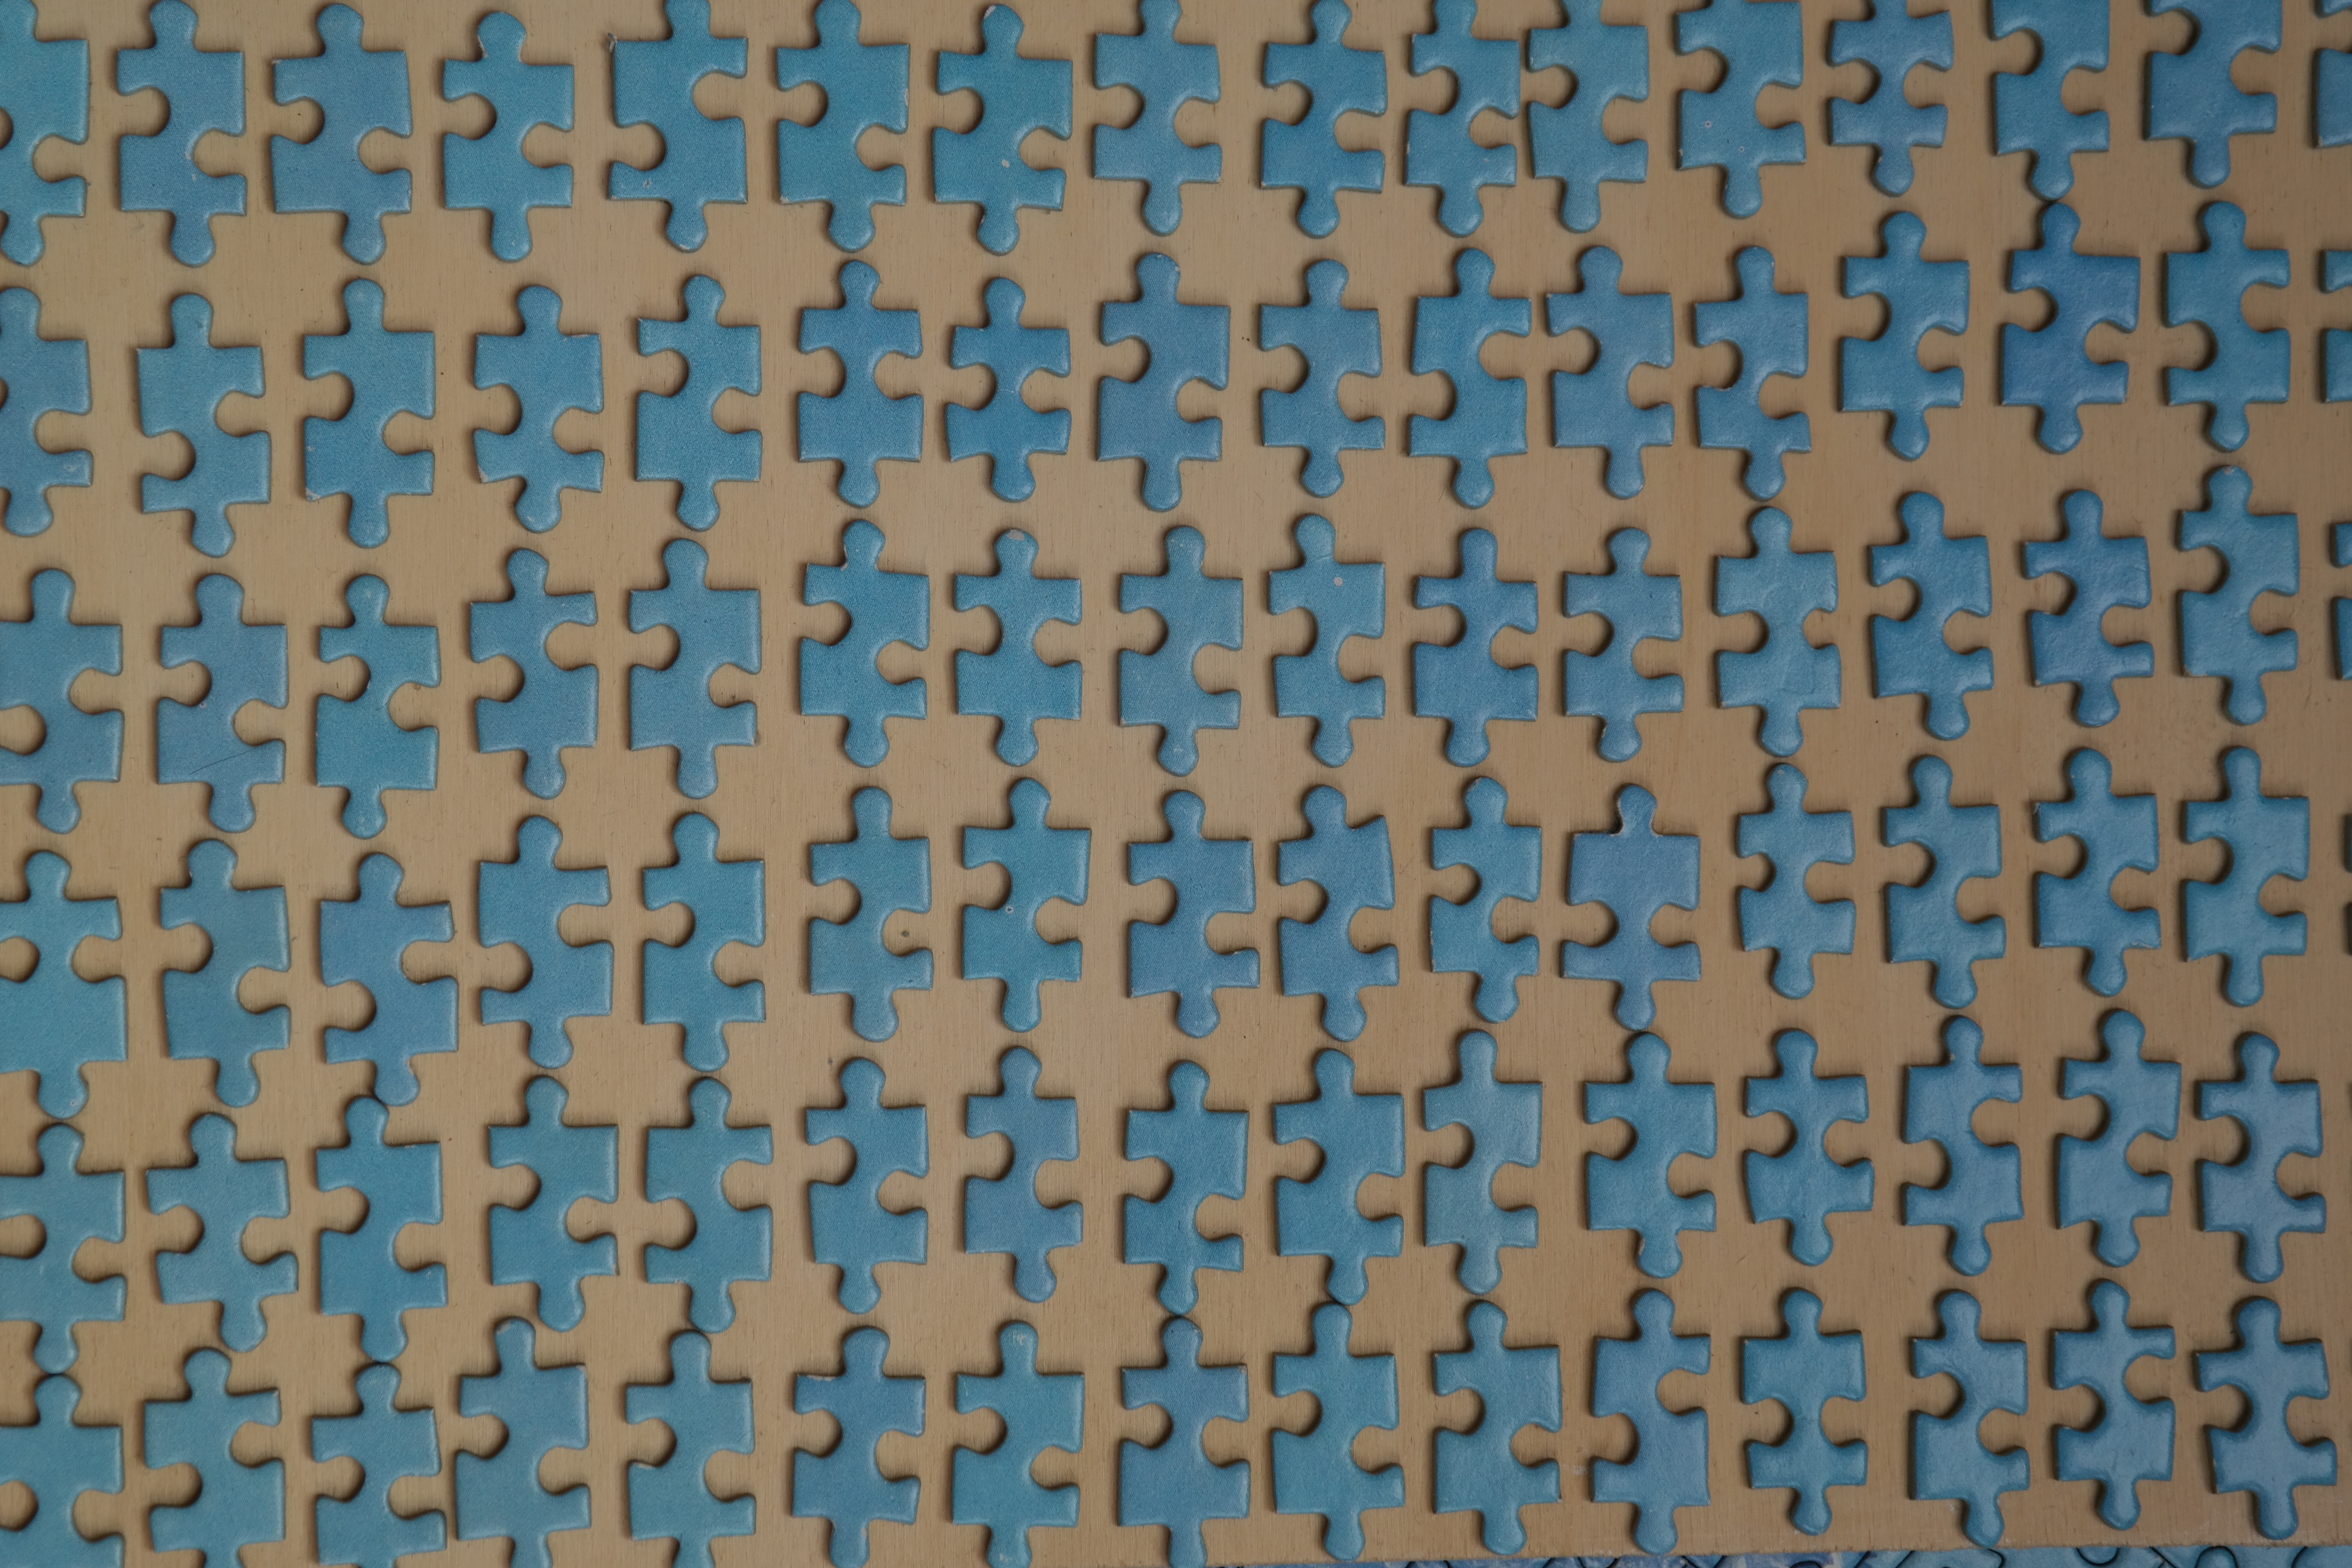 jigsaw puzzle surface